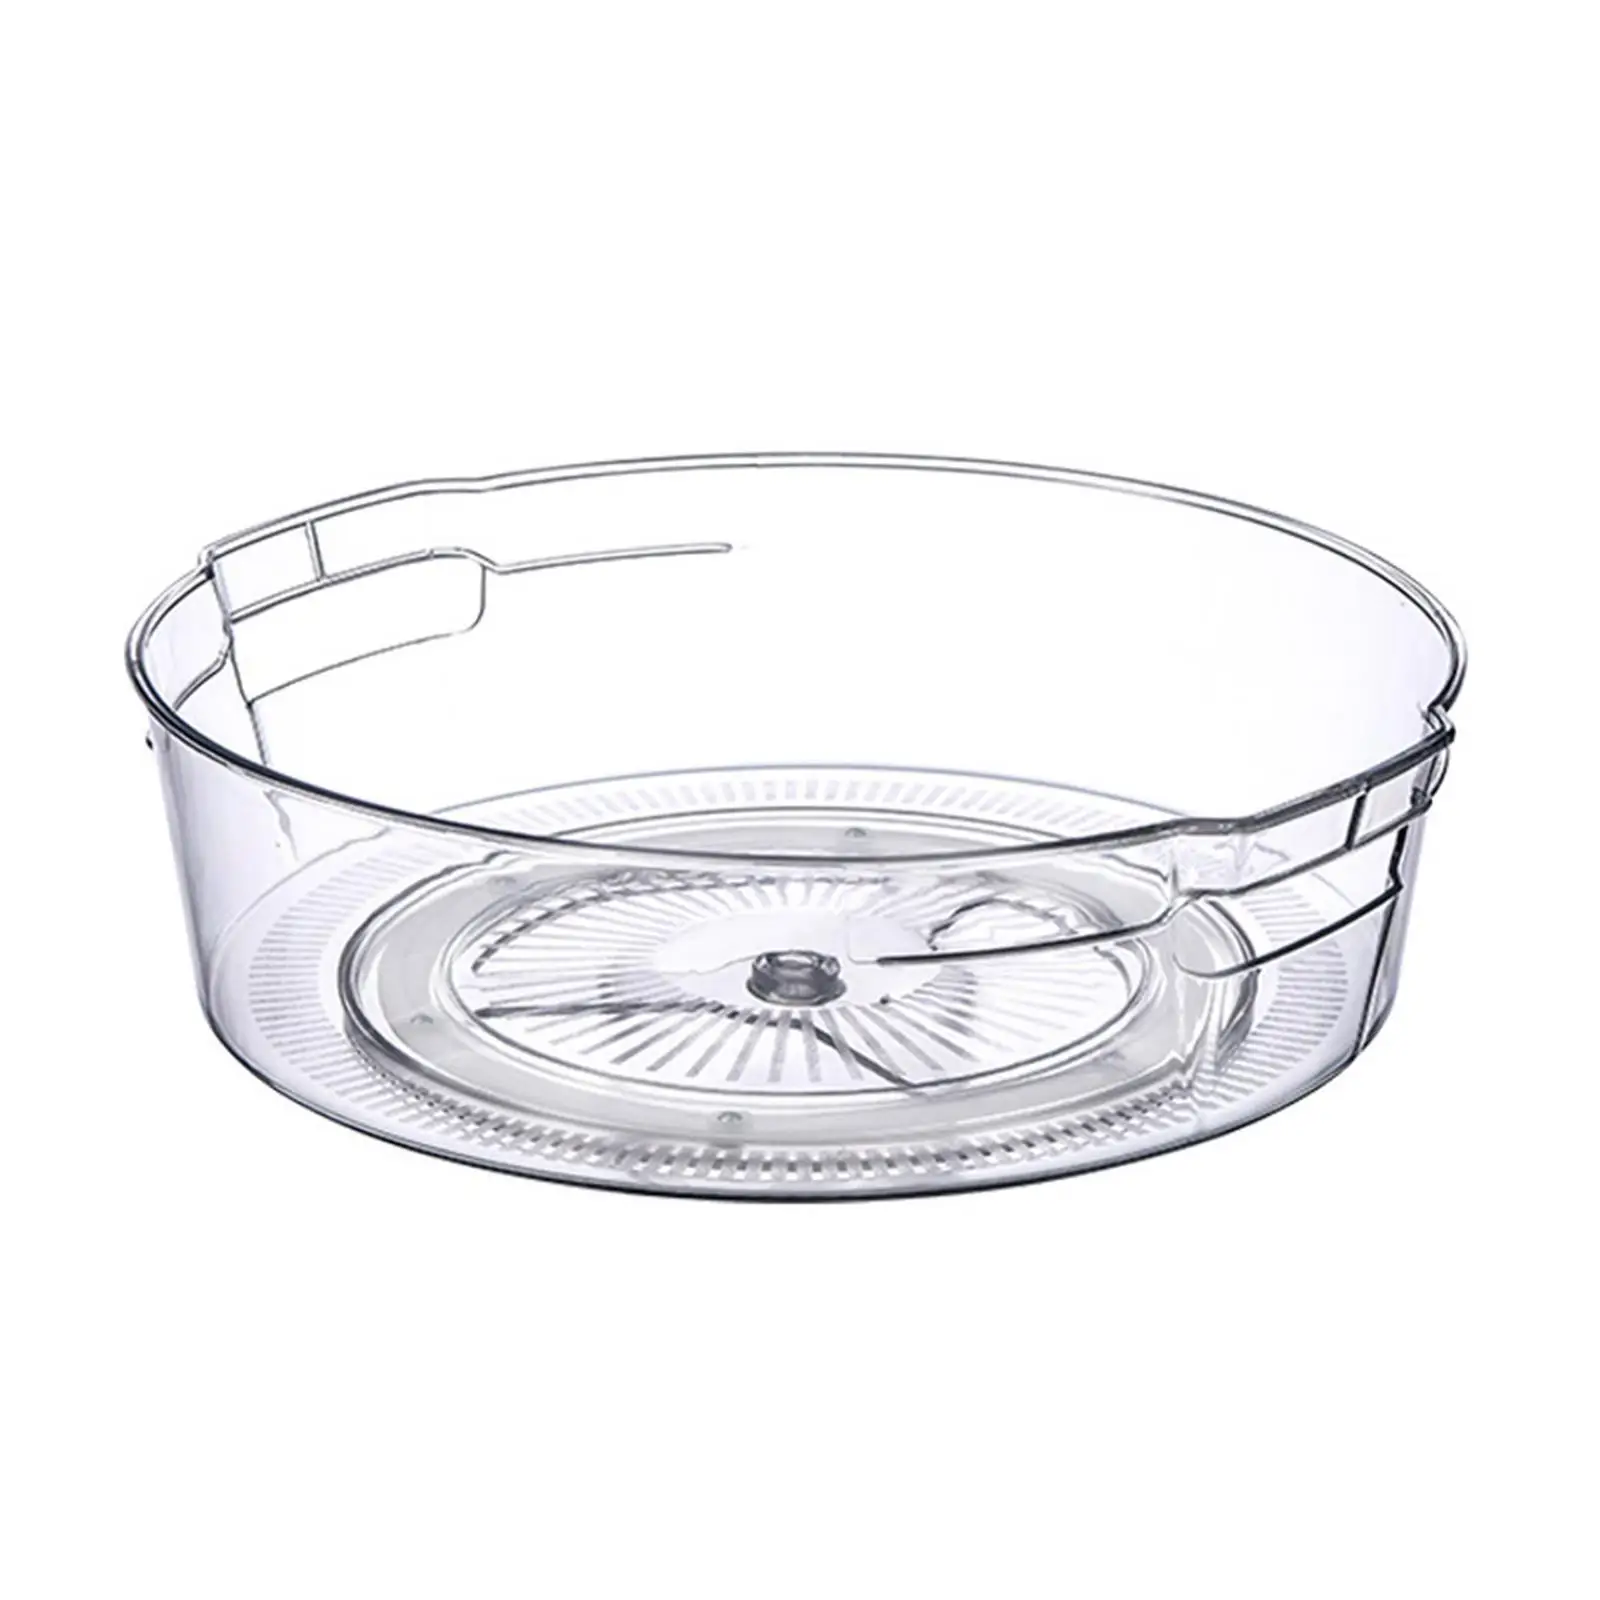 Organizer for Kitchen Display Rack Turntable Food Storage Container Rotating Condiments Spice Rack for Baking Kitchen